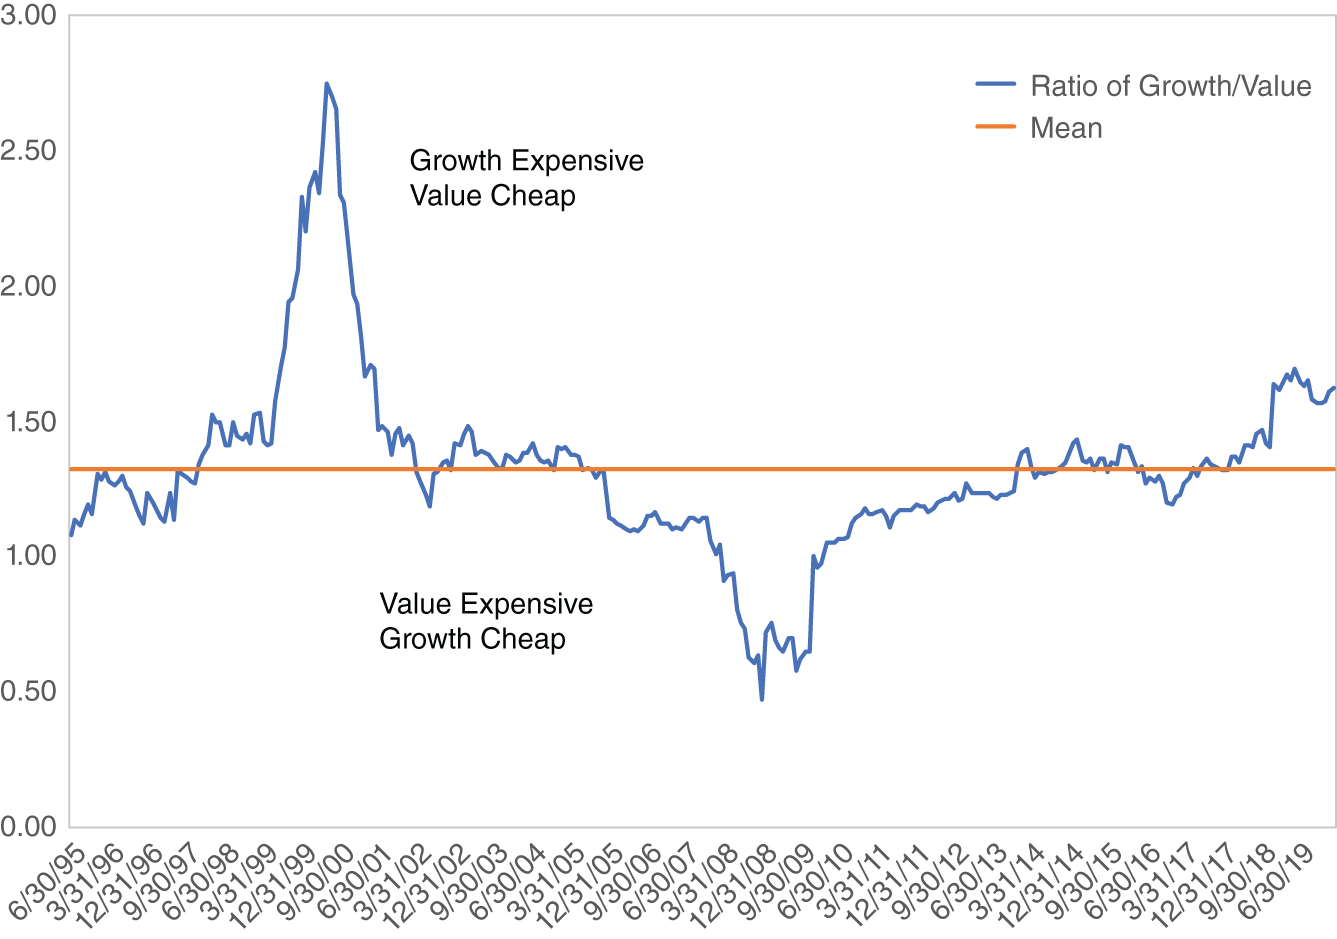 Graph depicts Ratio of P/E, S&P 500 Growth/Value